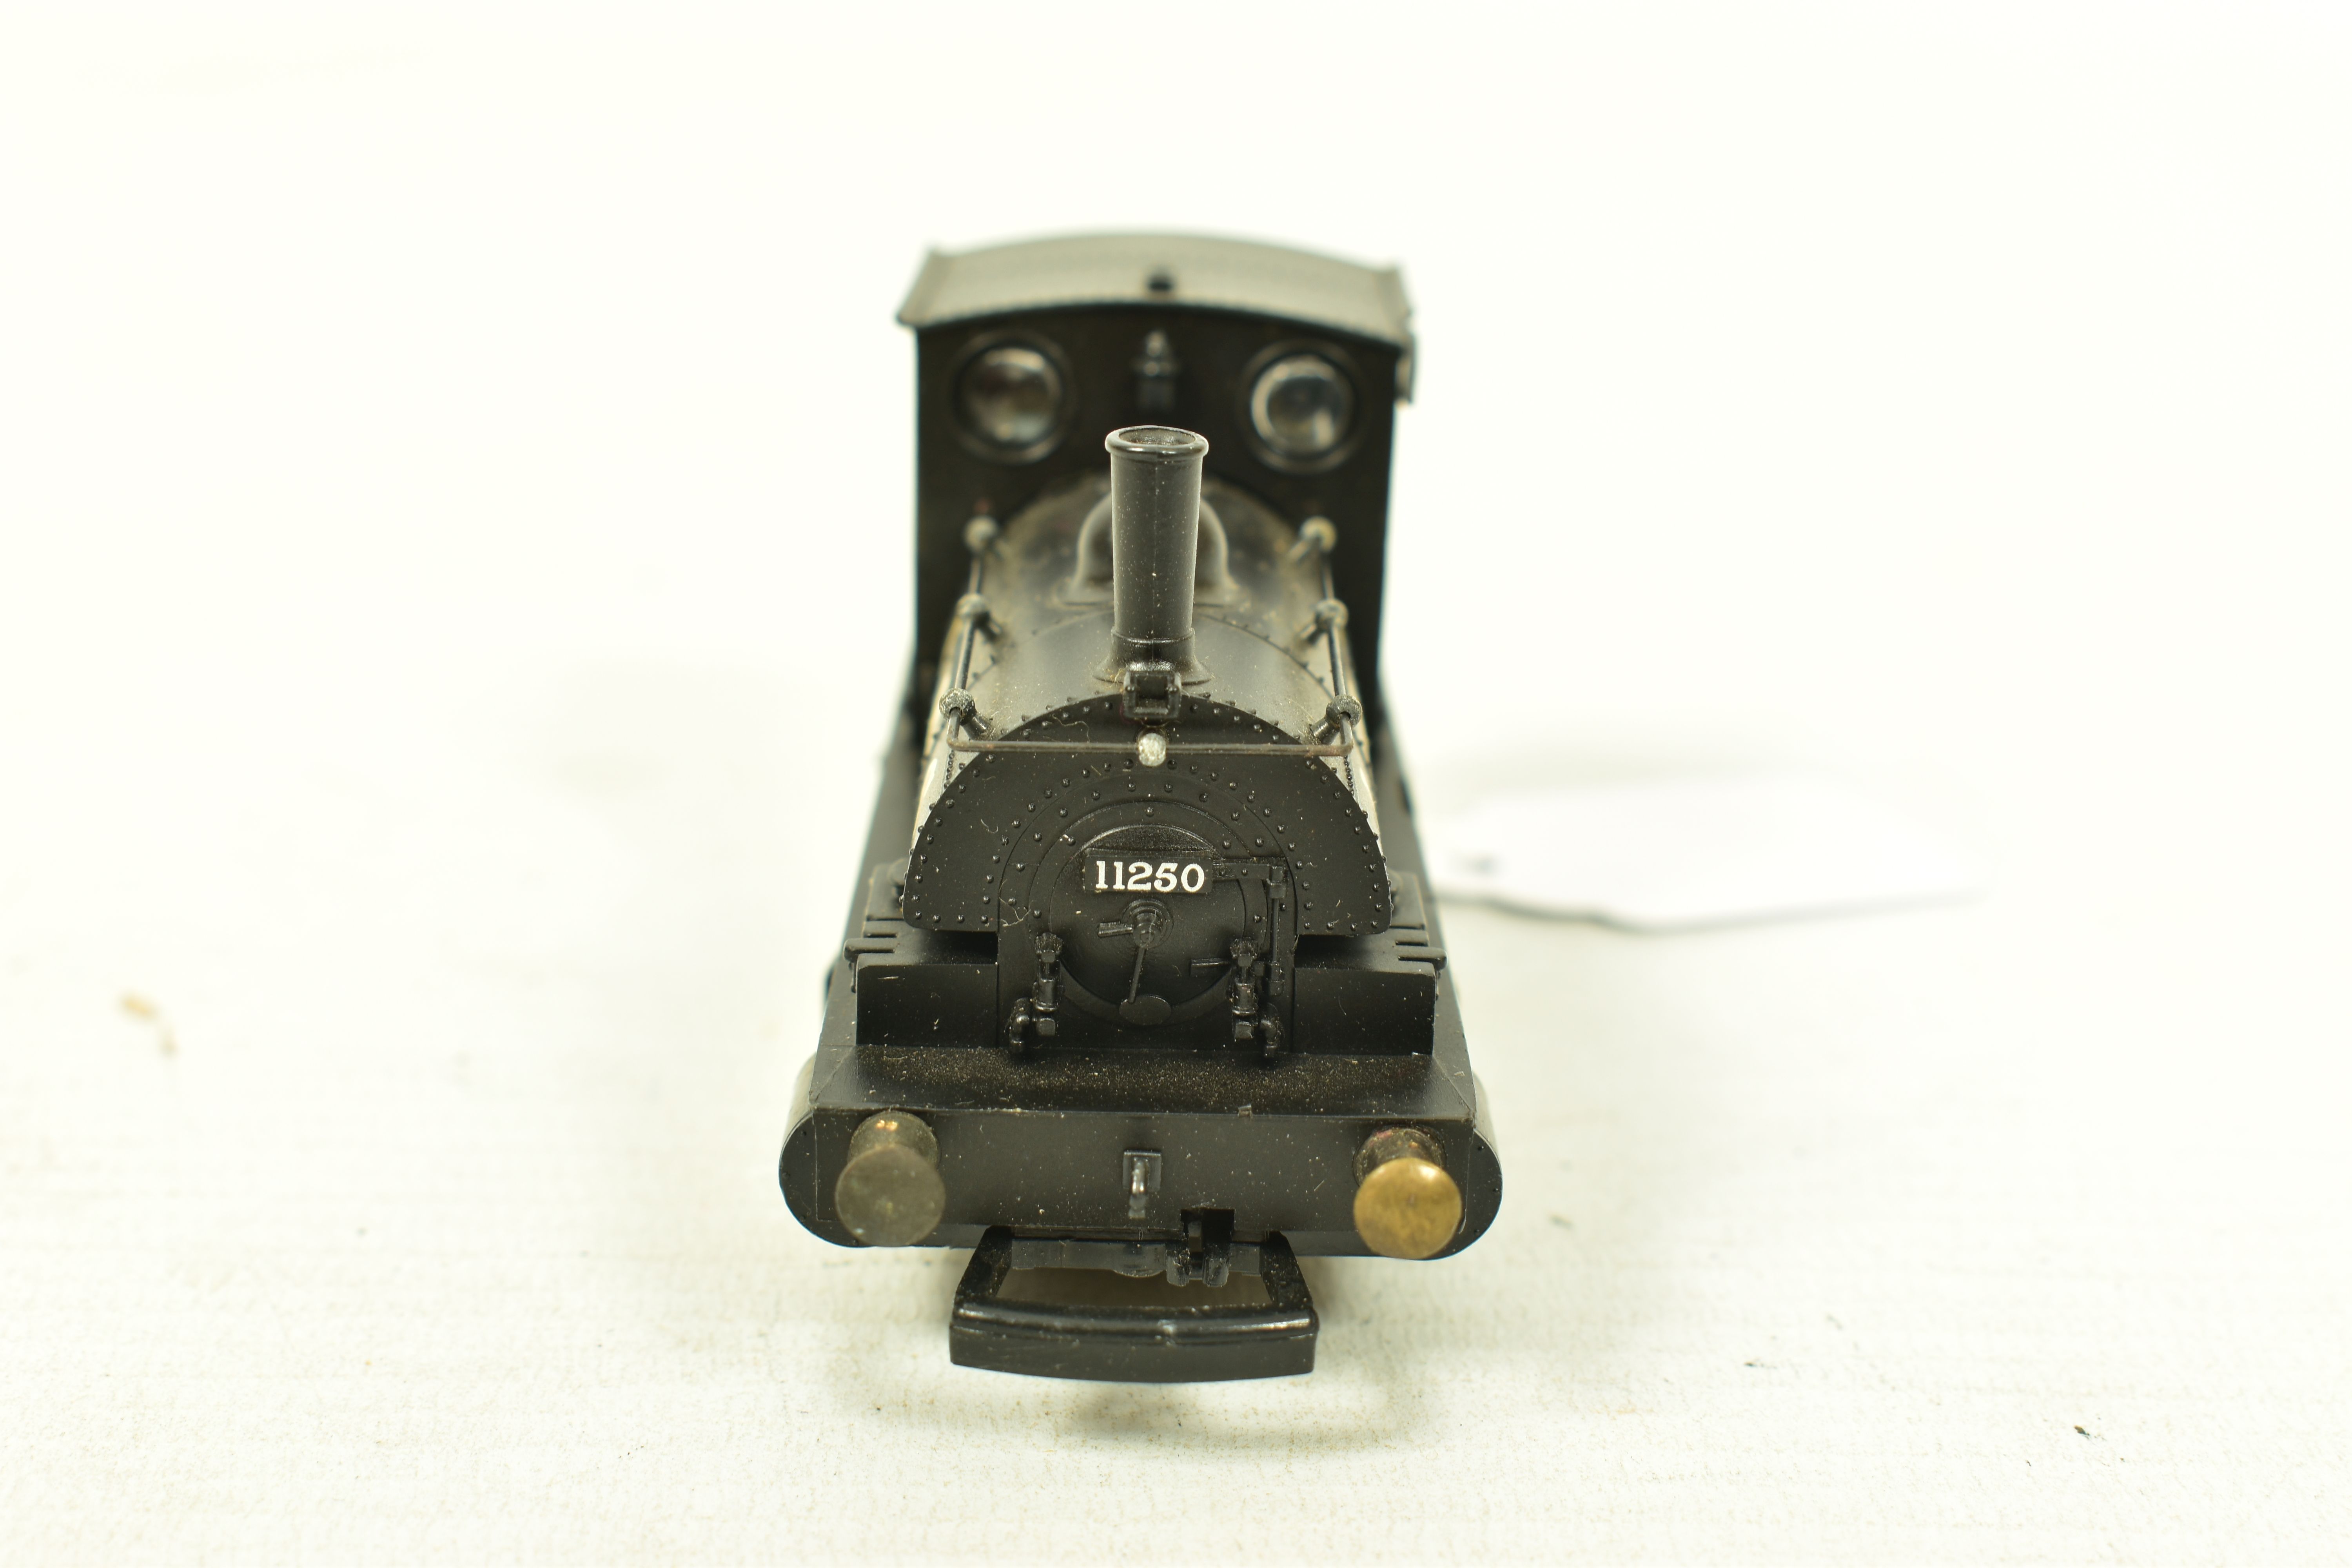 FIVE BOXED HORNBY OO GAUGE TANK LOCOMOTIVES, class B7 Pug, No.11250, L.M.S. black livery (R2065A), - Image 8 of 8